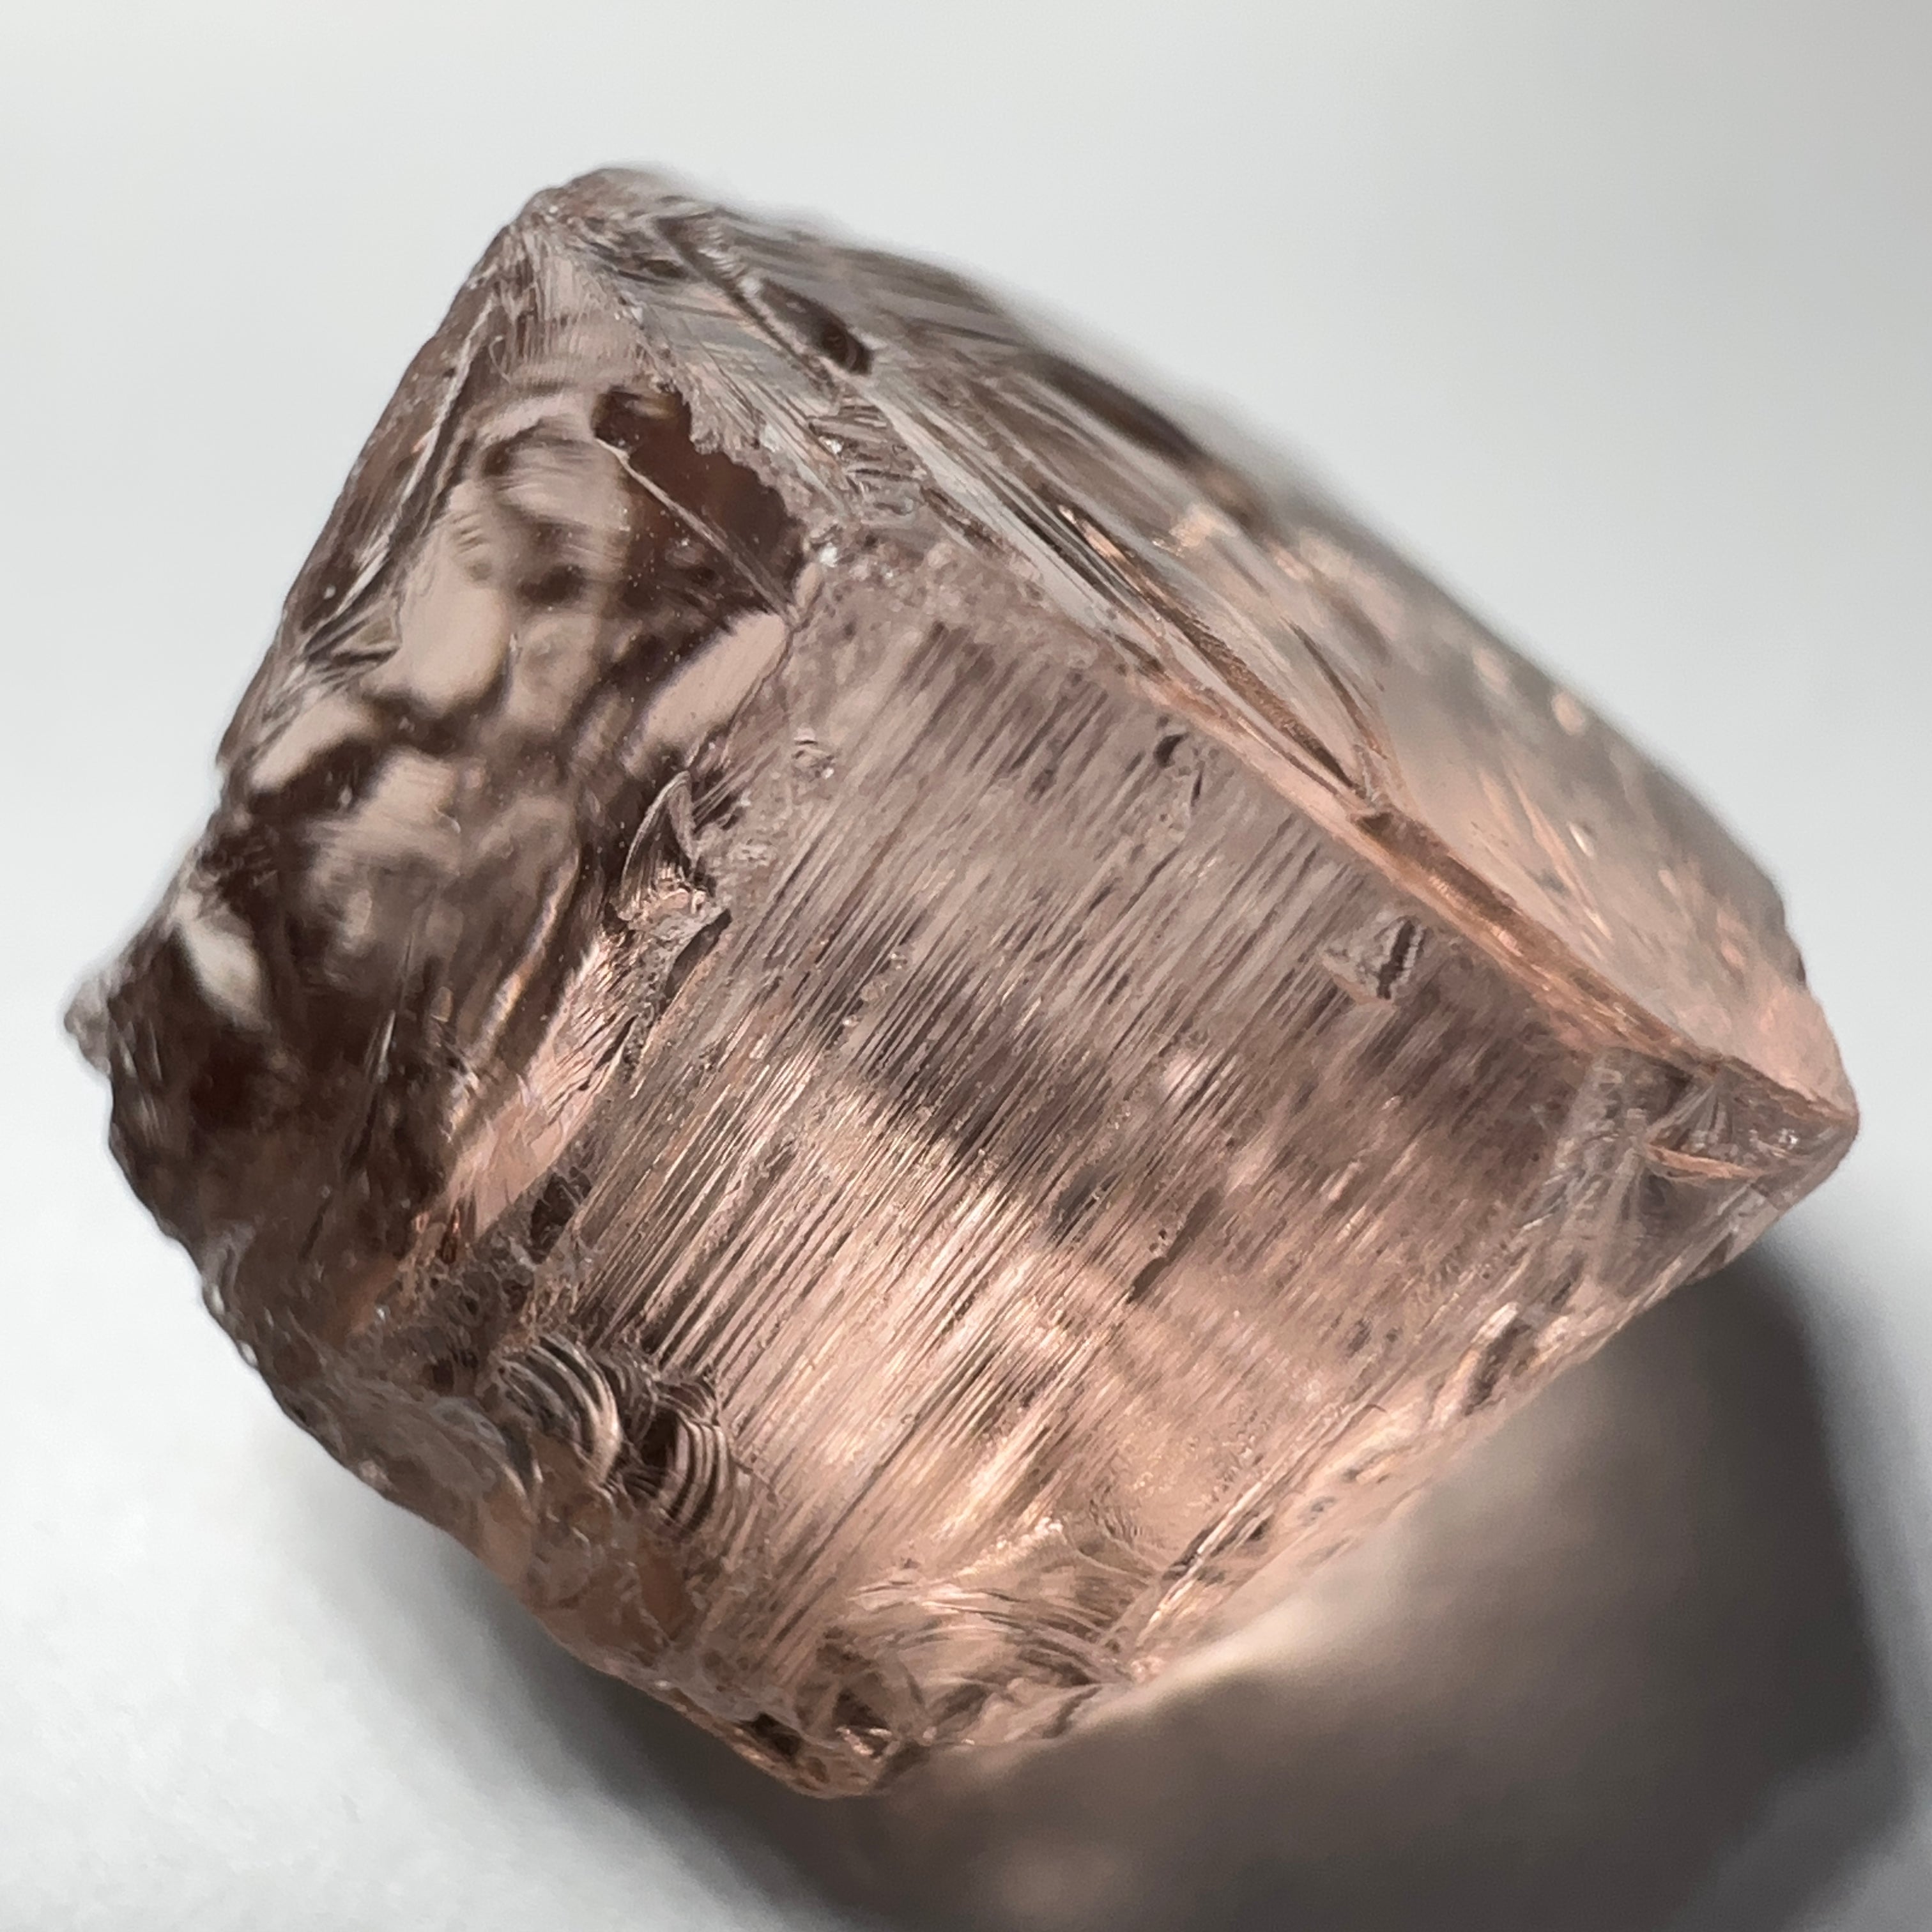 16.96ct Golden Danburite, Tanzania, Untreated Unheated. Precision Cut, Collectors Stone, VERY RARE AND DIFFICULT TO GET IN THIS SIZE